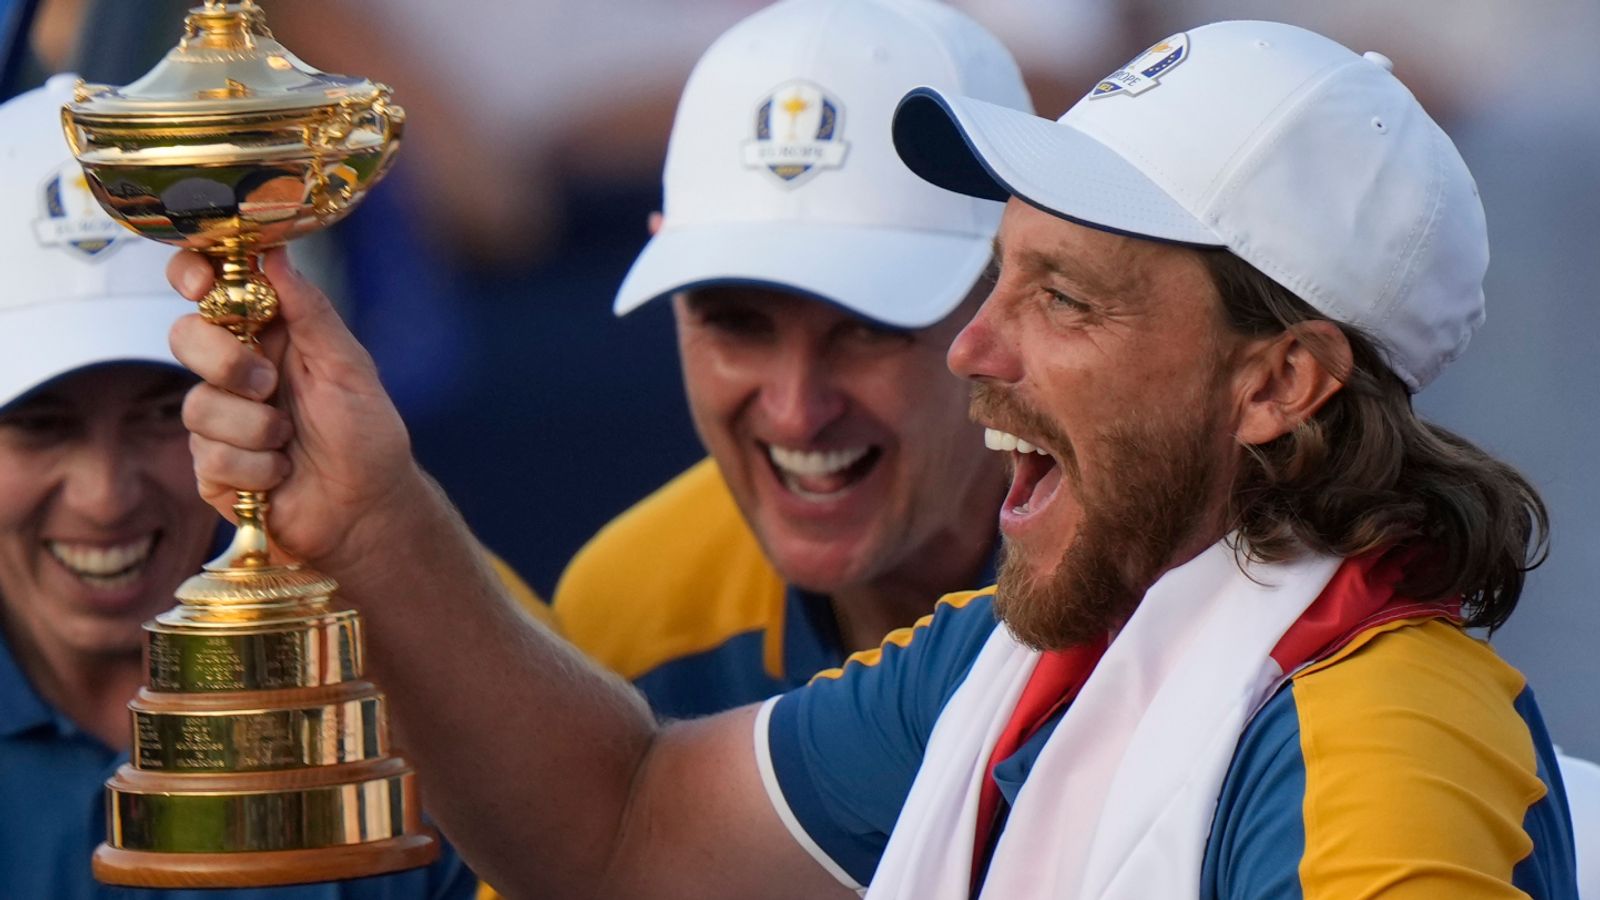 Ryder Cup 2023: Tommy Fleetwood reveals premonition he was going to get Europe’s winning point in Rome